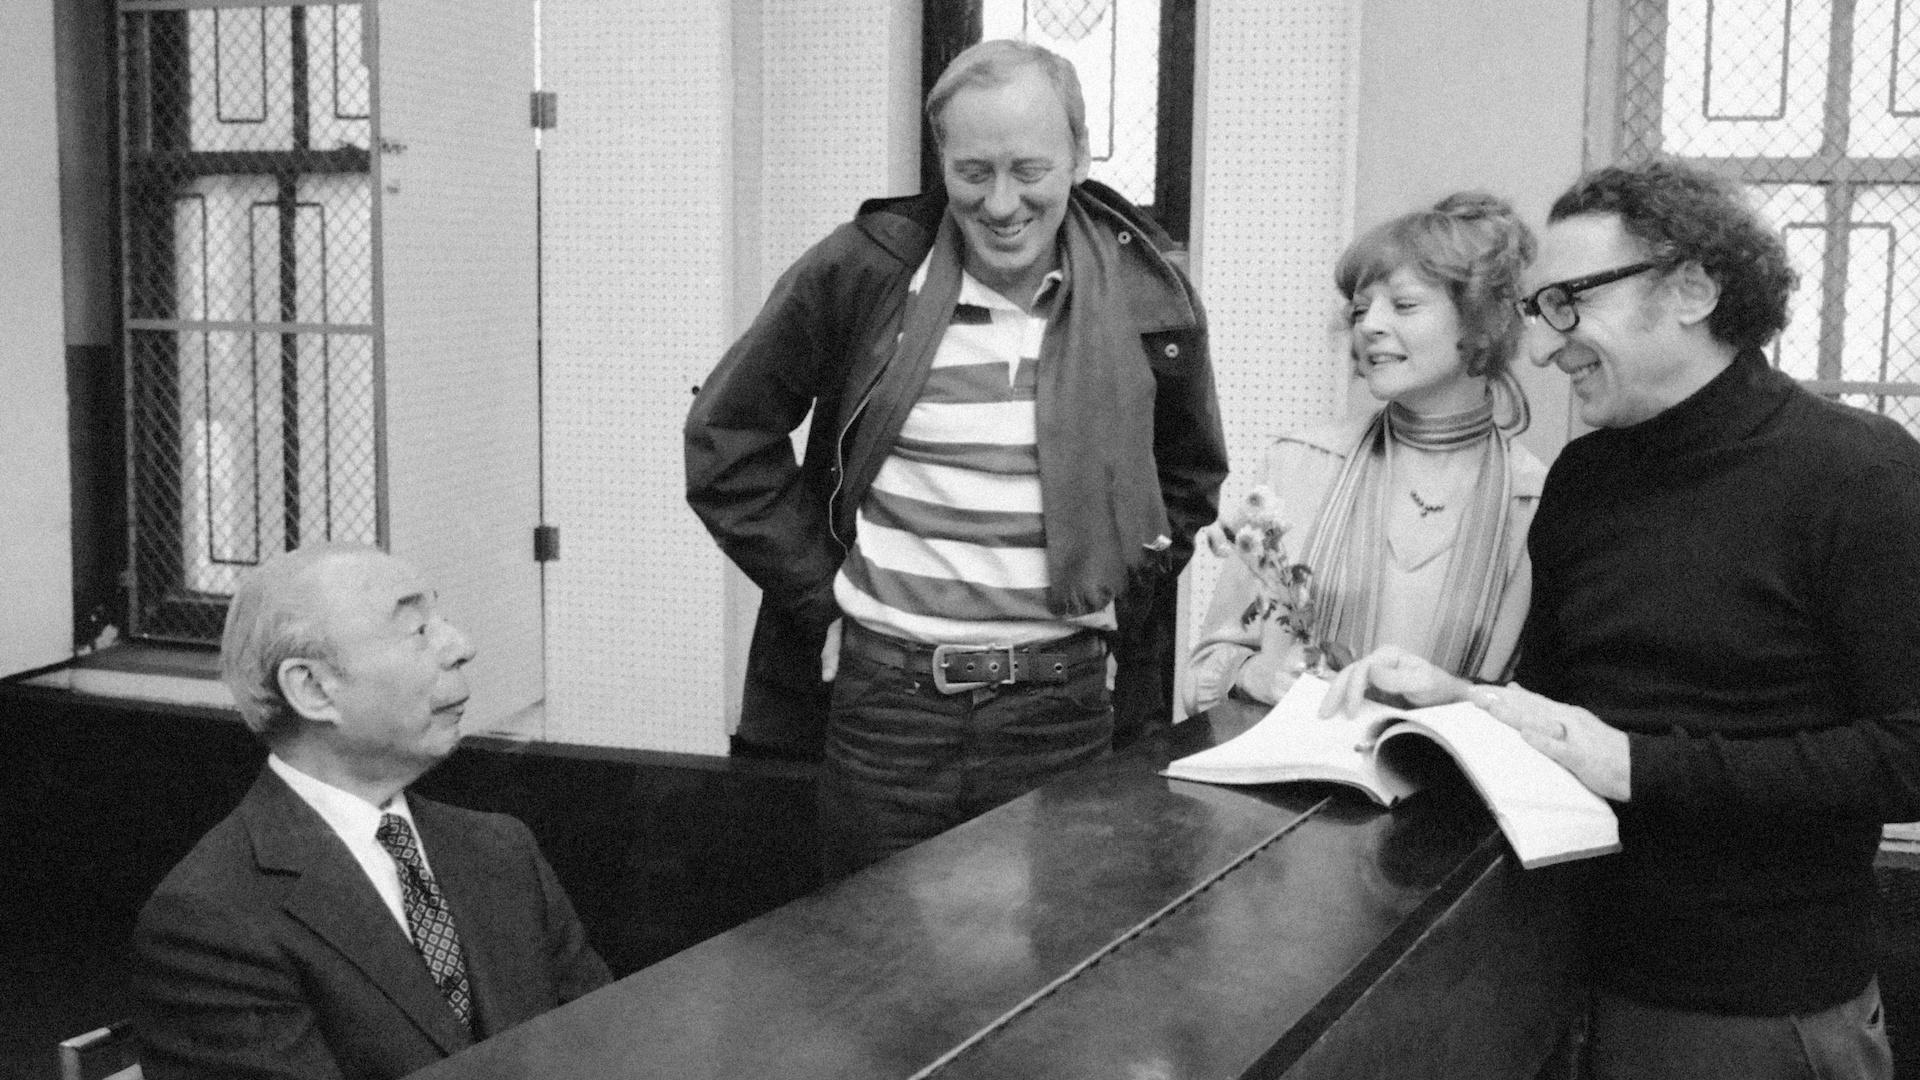 Composer Richard Rodgers, left, appears with cast members of "REX" Nicol Williamson, center, and Penny Fuller, as lyricist Sheldon Harnick, right, looks on in New York on Jan. 19, 1976. (AP Photo/Marty Lederhandler, File)